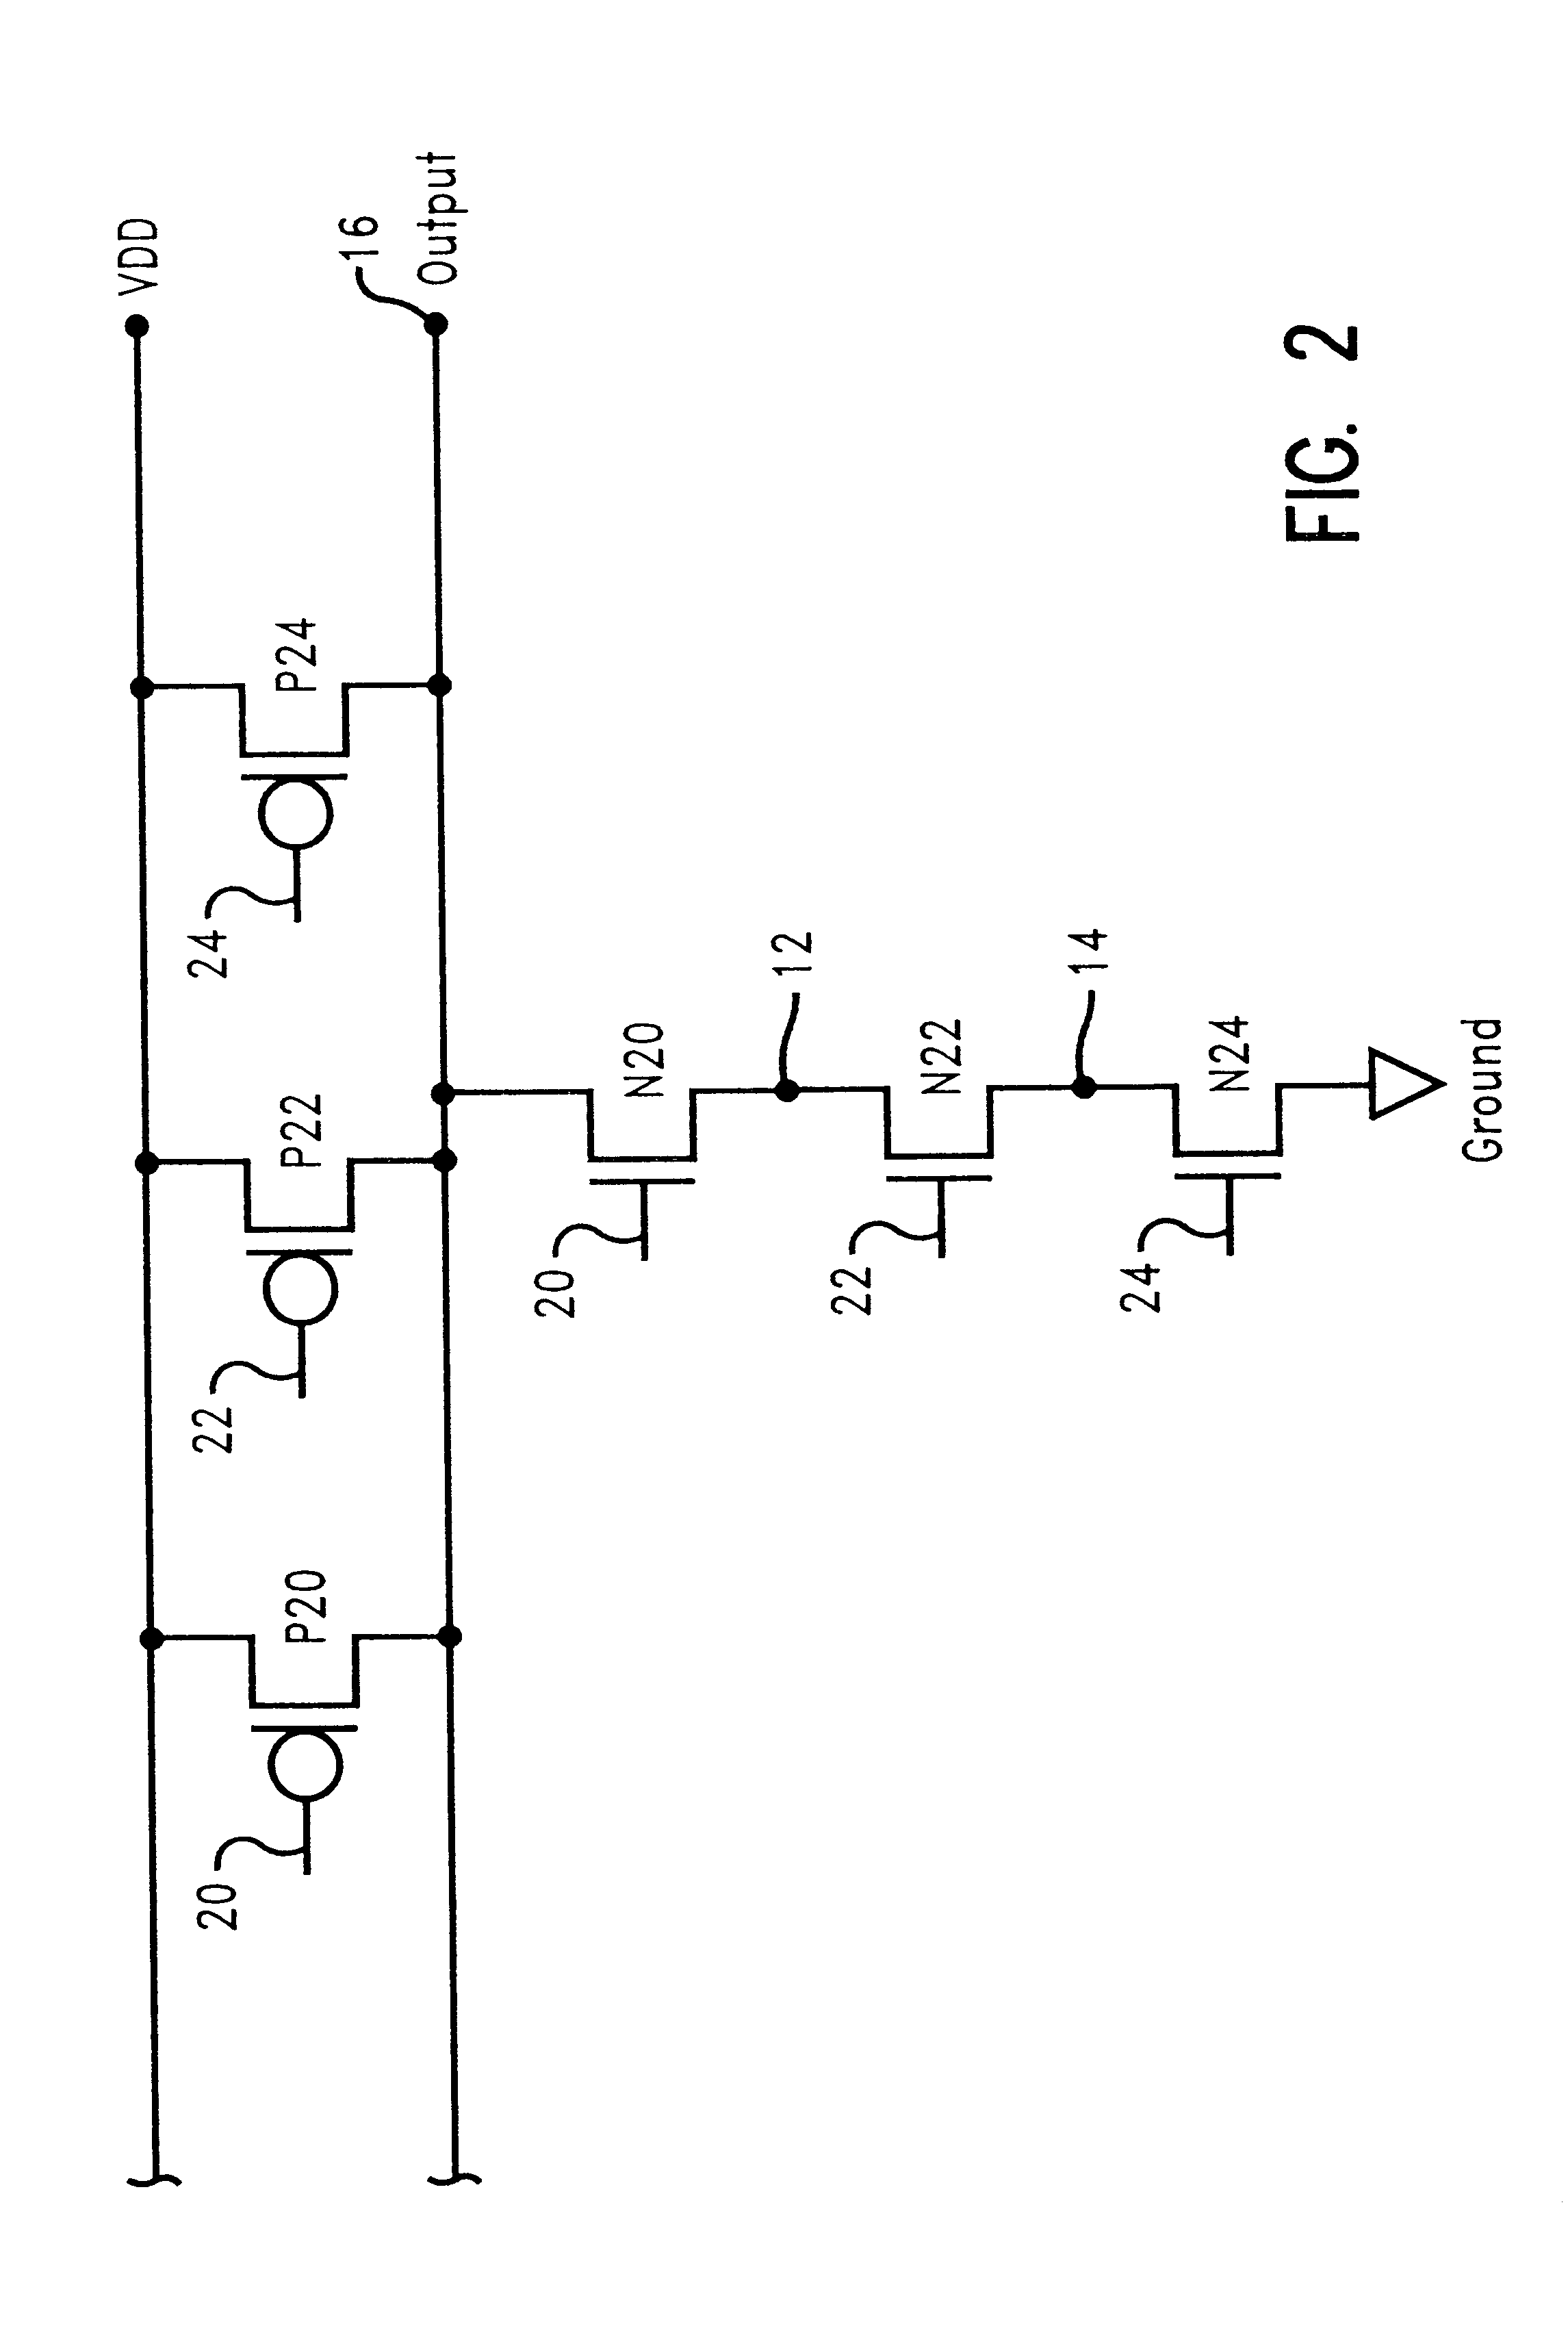 Use of static noise analysis for integrated circuits fabricated in a silicon-on-insulator process technology